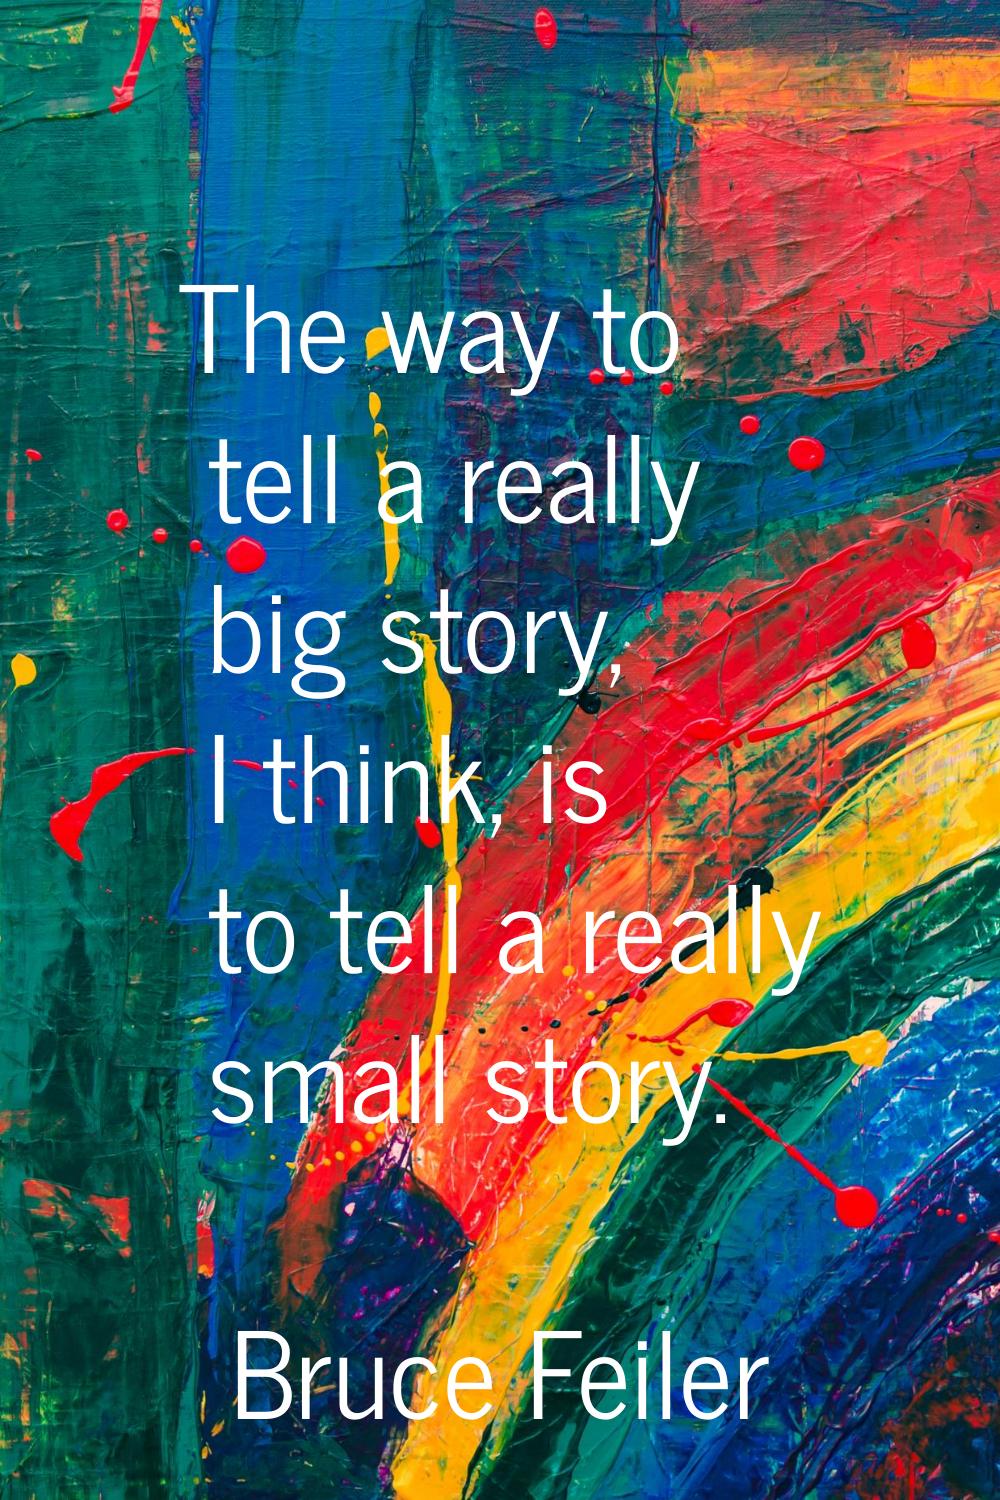 The way to tell a really big story, I think, is to tell a really small story.